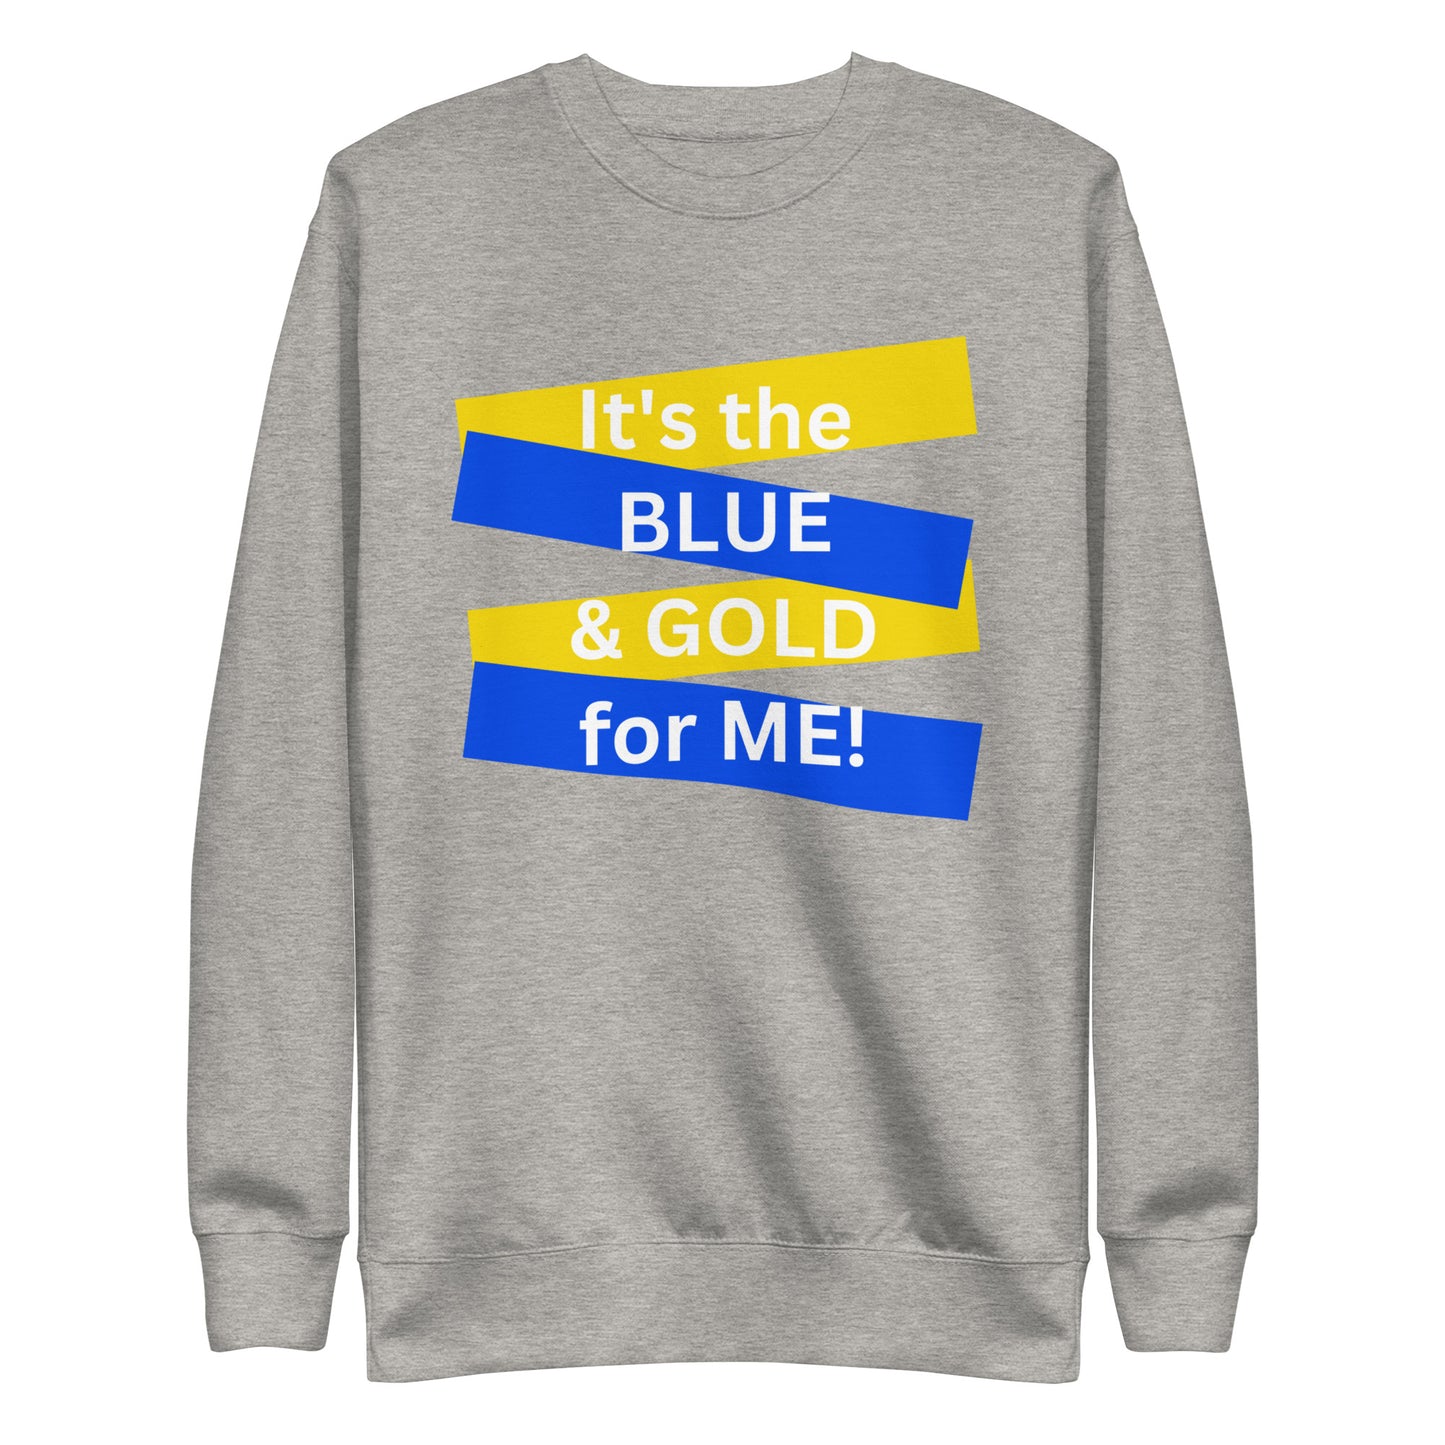 Adult "BLUE and GOLD" Sweatshirt